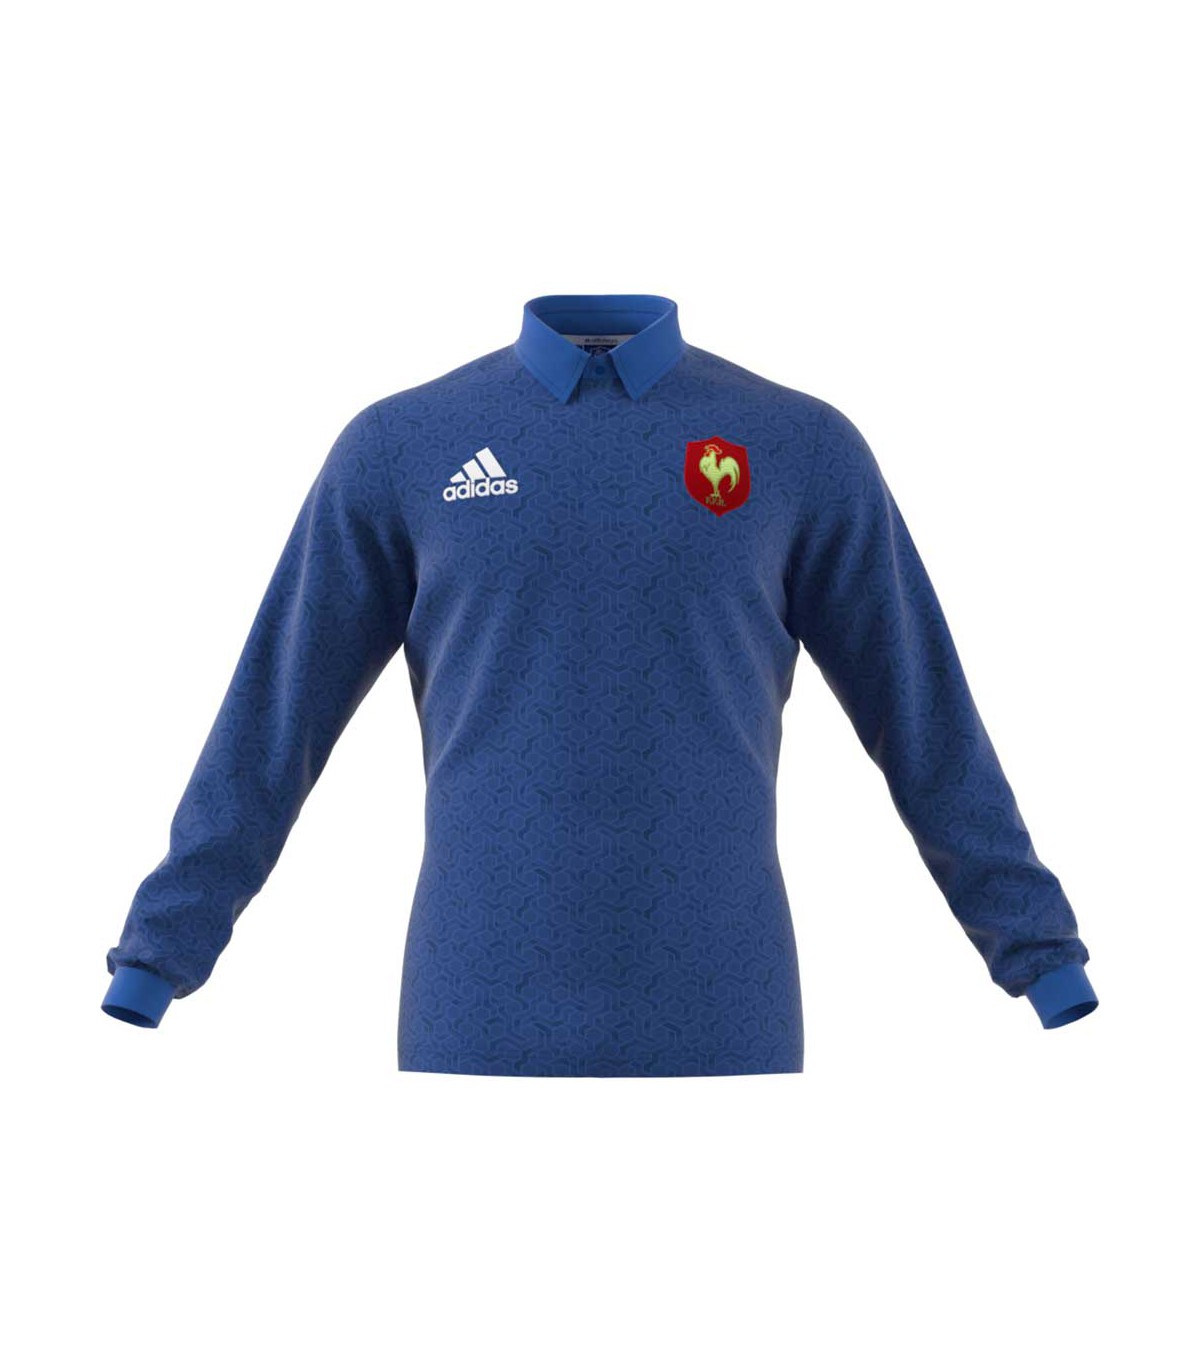 XV'S FRANCE RUGBY POLO SHIRT 2017/2018 ADULT - ADIDAS at shop